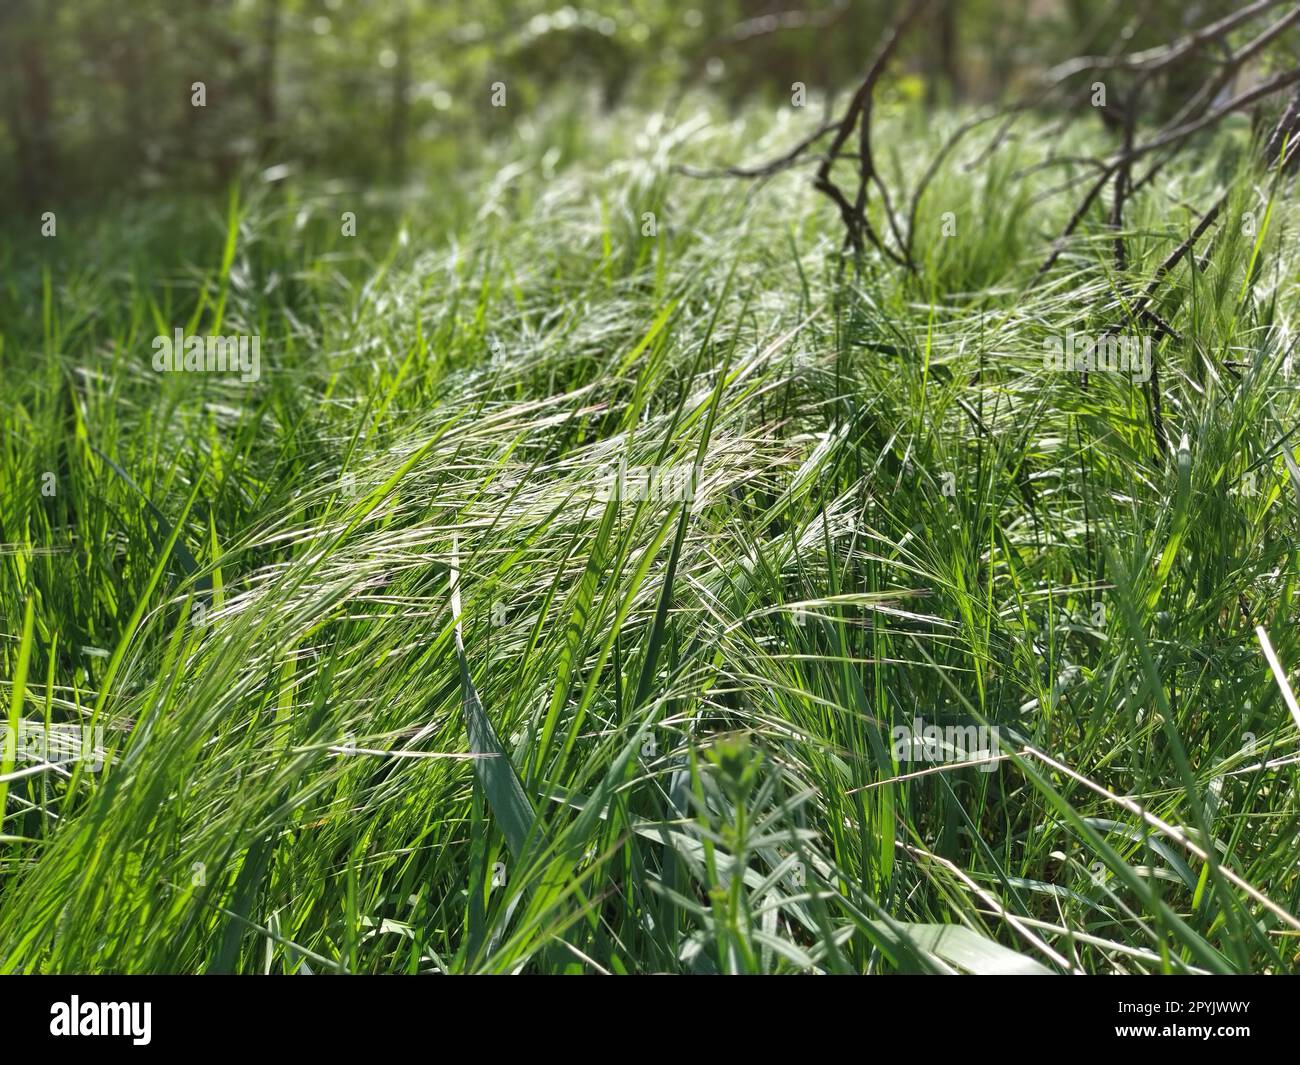 Tall green grass bending in the wind. Black broken tree branches in the background. Summer forest. Ecology, life and death concept Stock Photo